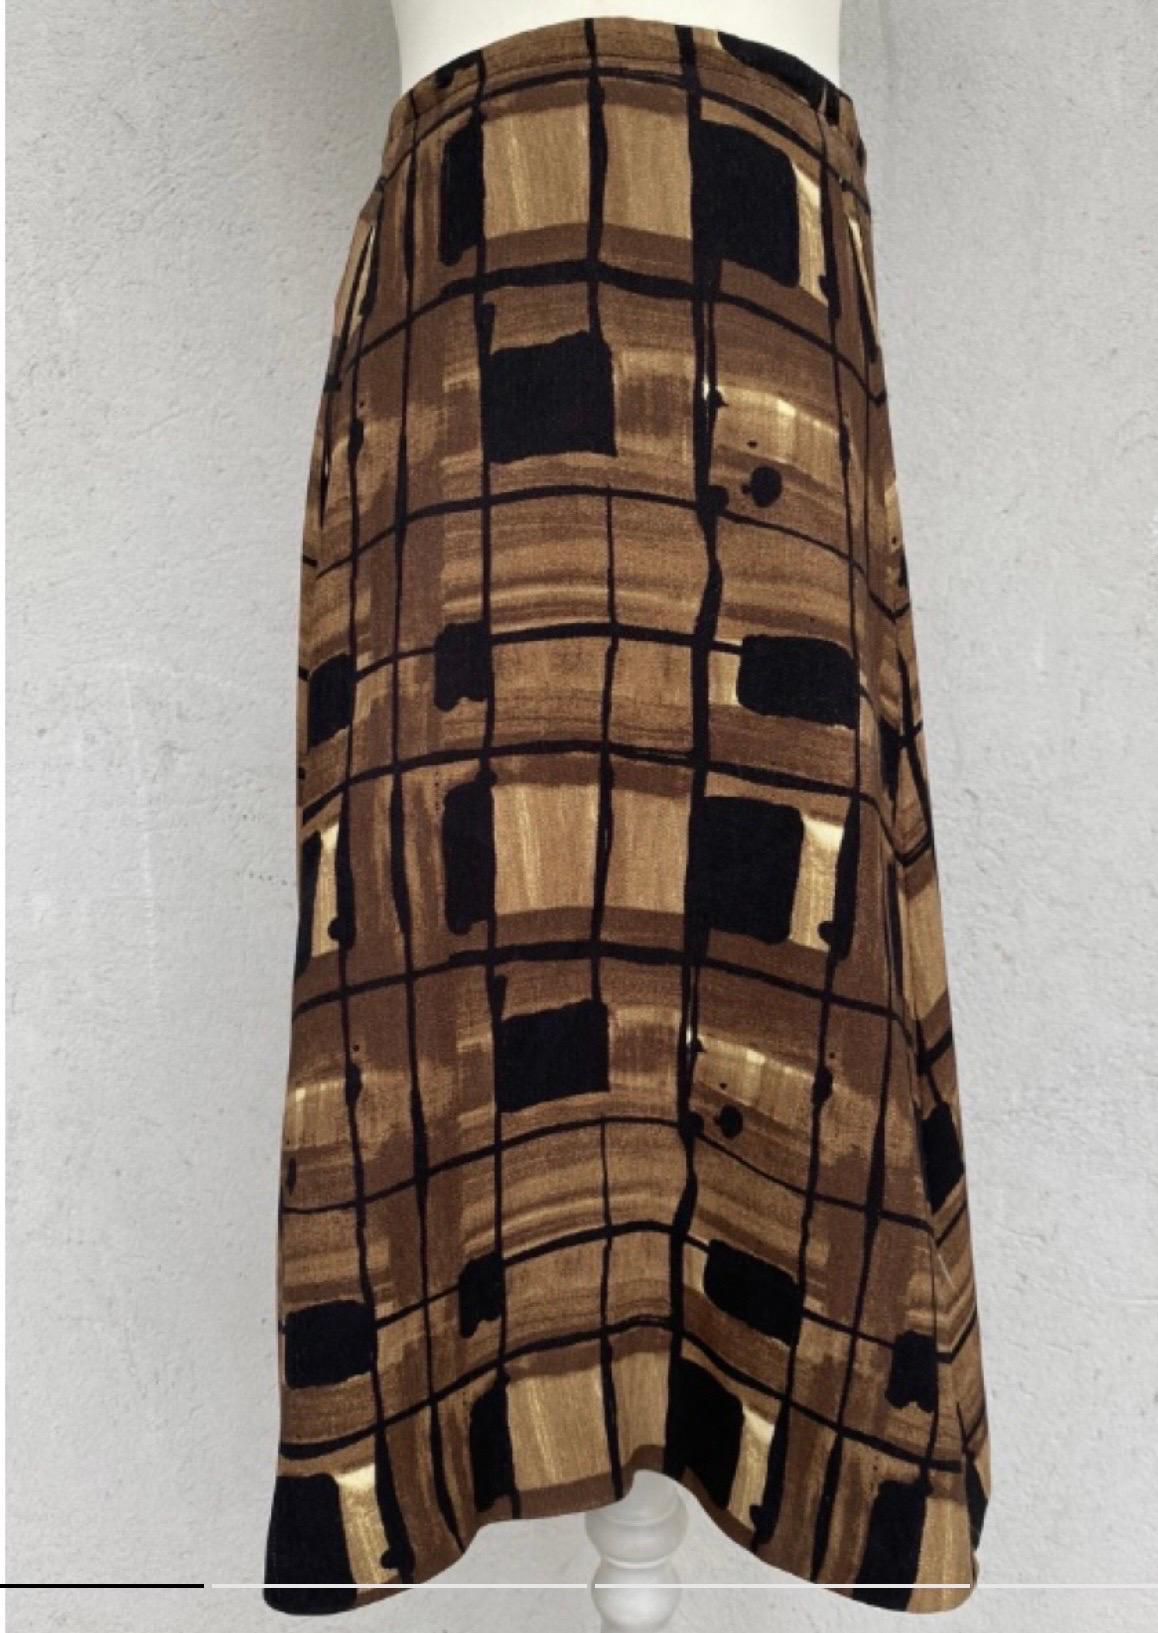 Prada ready to wear AW10 skirt, size 42 in cotton in shades of brown, measurements: waist 28 cm, hips 48 cm, length 56 cm, in excellent condition.